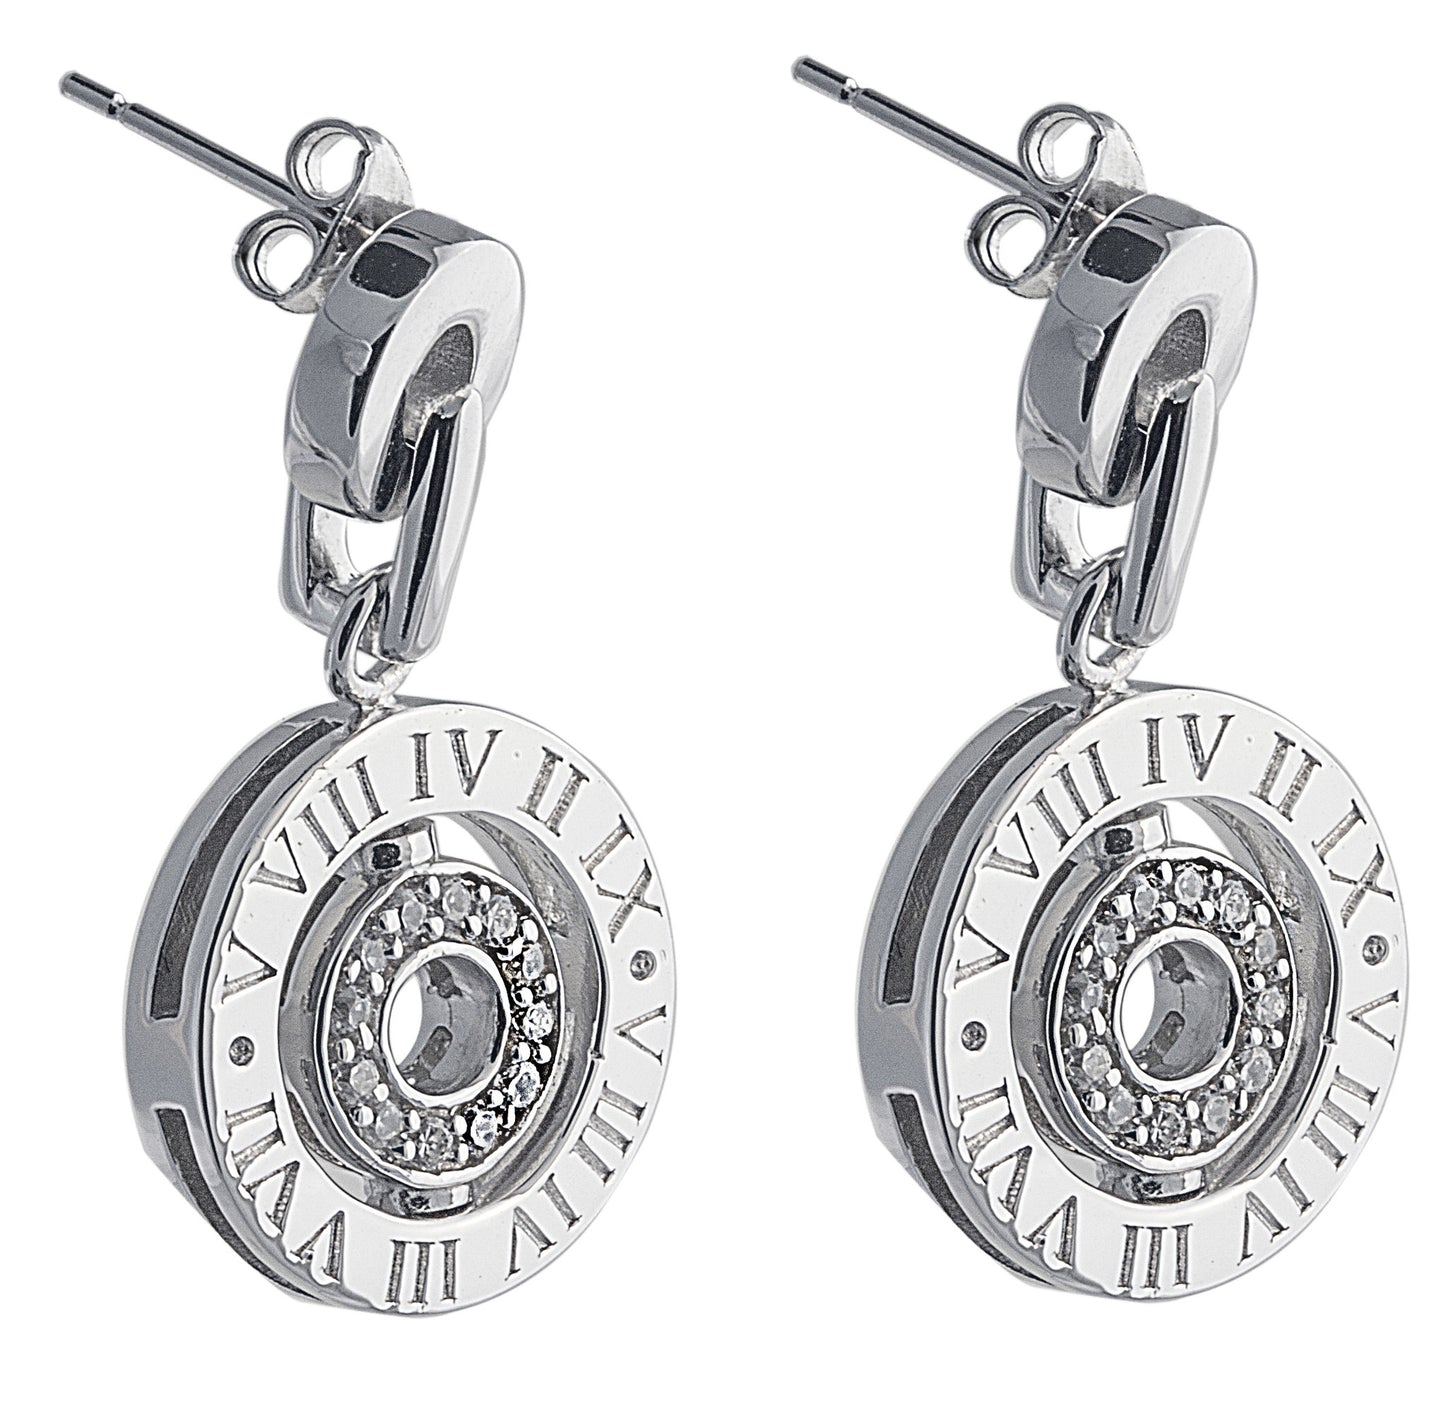 Juicy Drop Earrings in 925 Sterling Silver with Cubic Zirconia Stones and Roman Numerals. Worldwide Shipping.